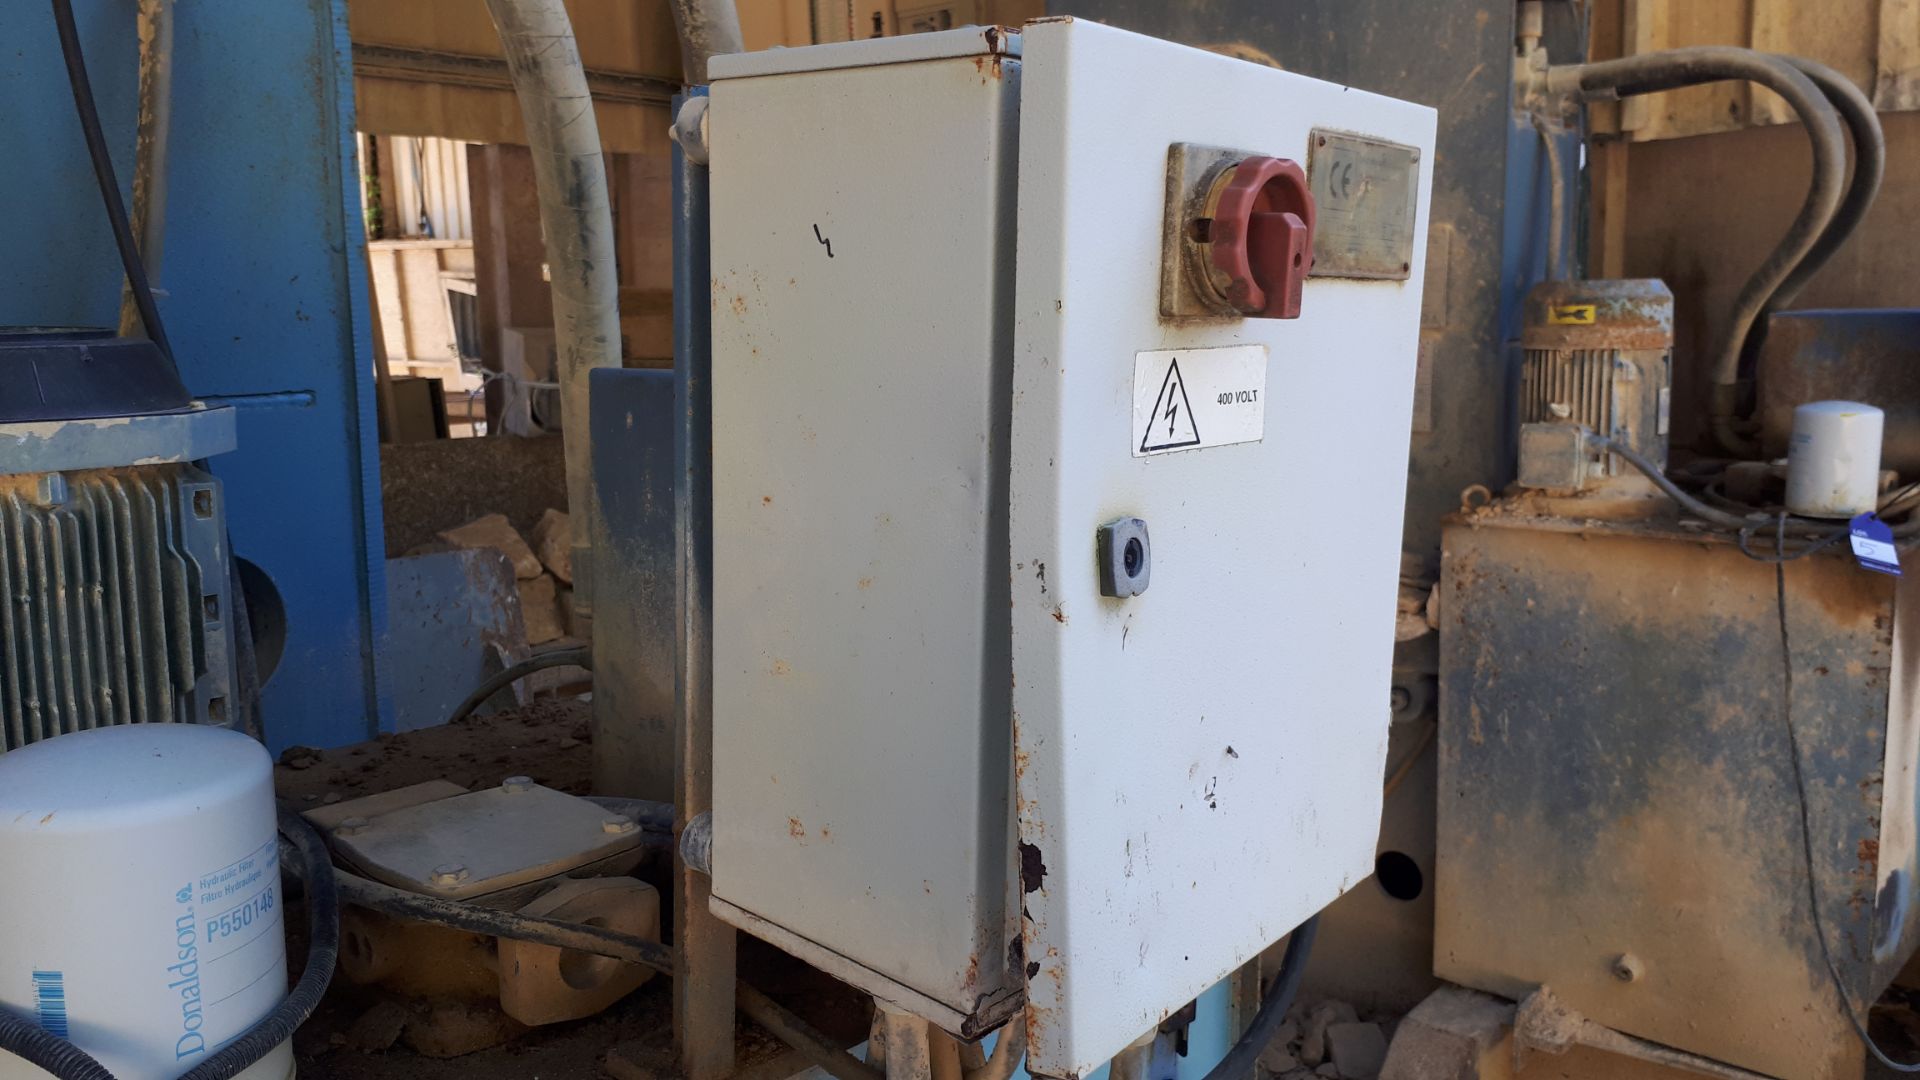 MEC C320 Stone Splitter/Guillotine machine, Serial Number P0232600811 (2011). Damage to electrical - Image 11 of 21